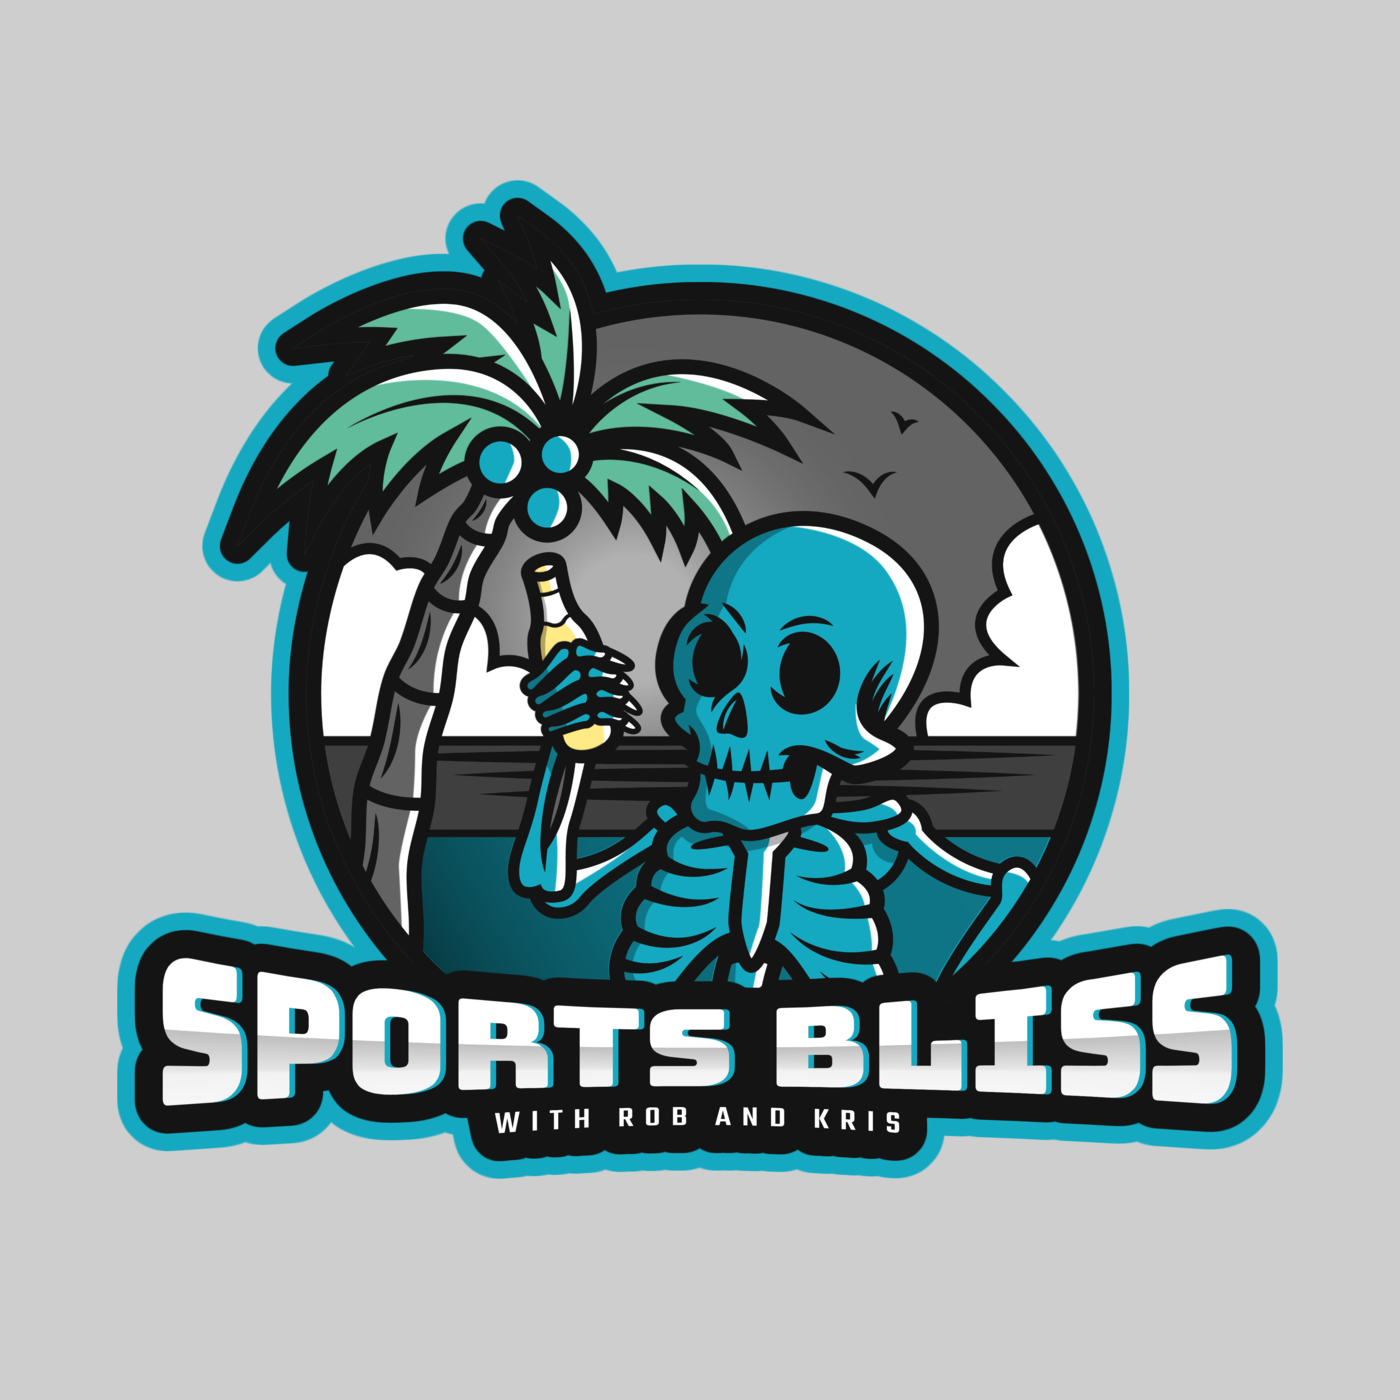 Artwork for Sports Bliss with Rob and Kris